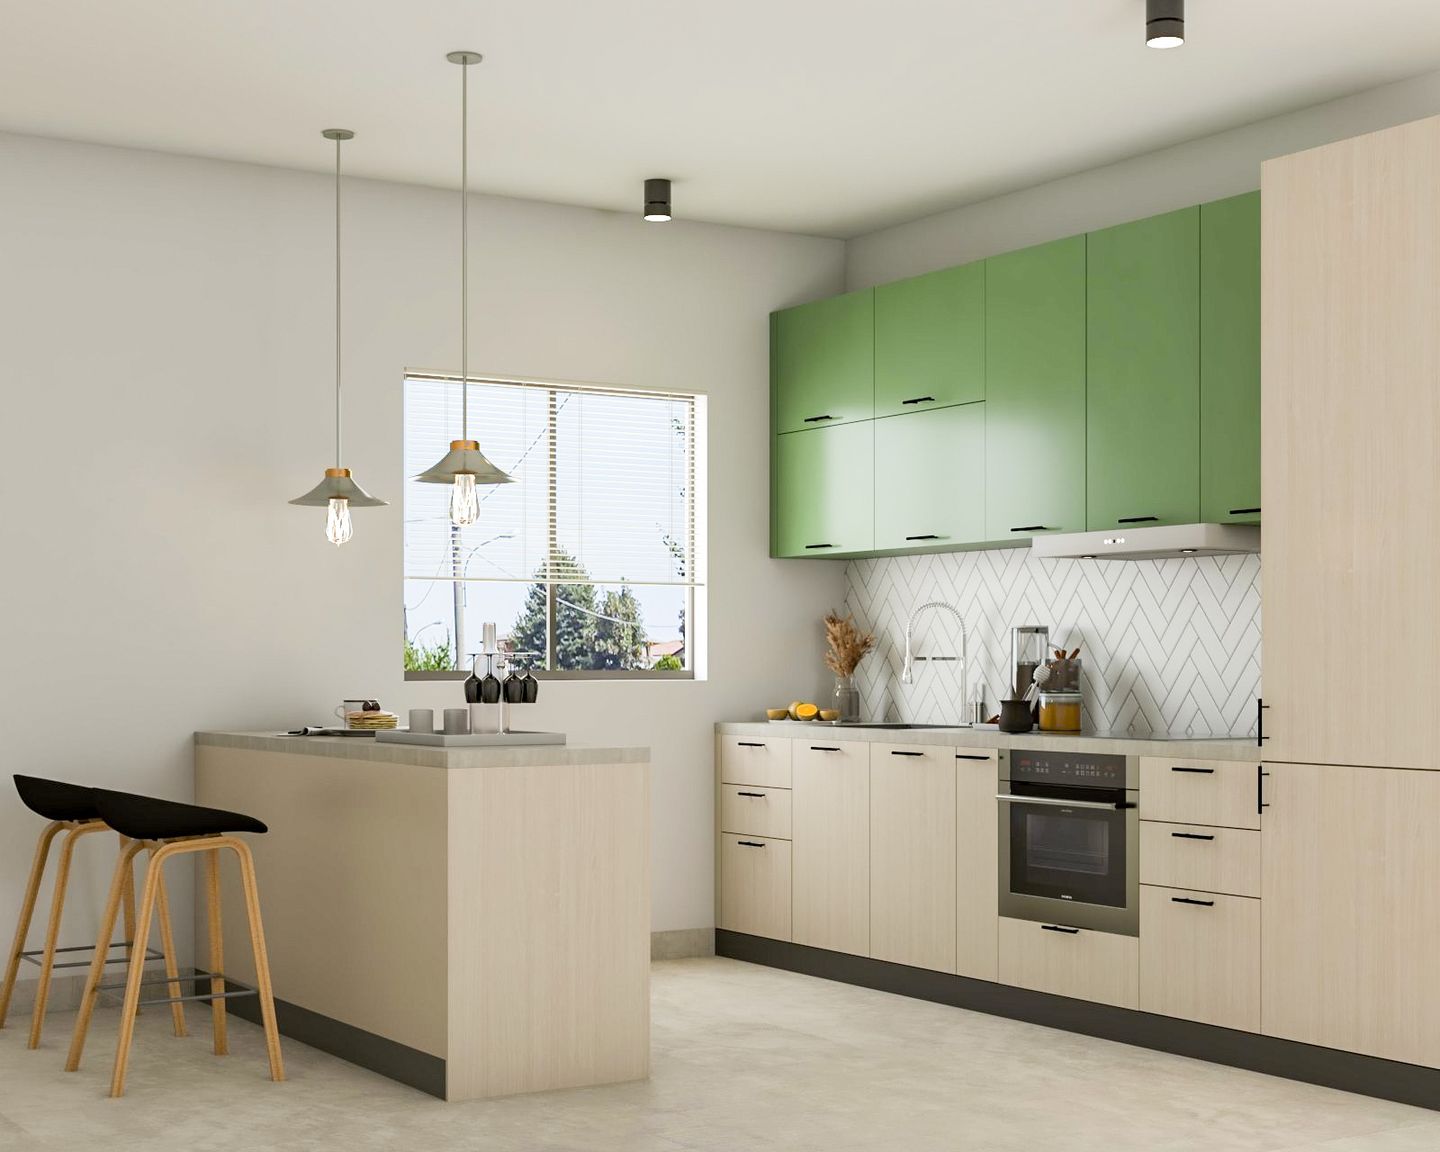 Minimal Glam Open Kitchen Design With Light Green And Brown Kitchen Cabinets - Livspace